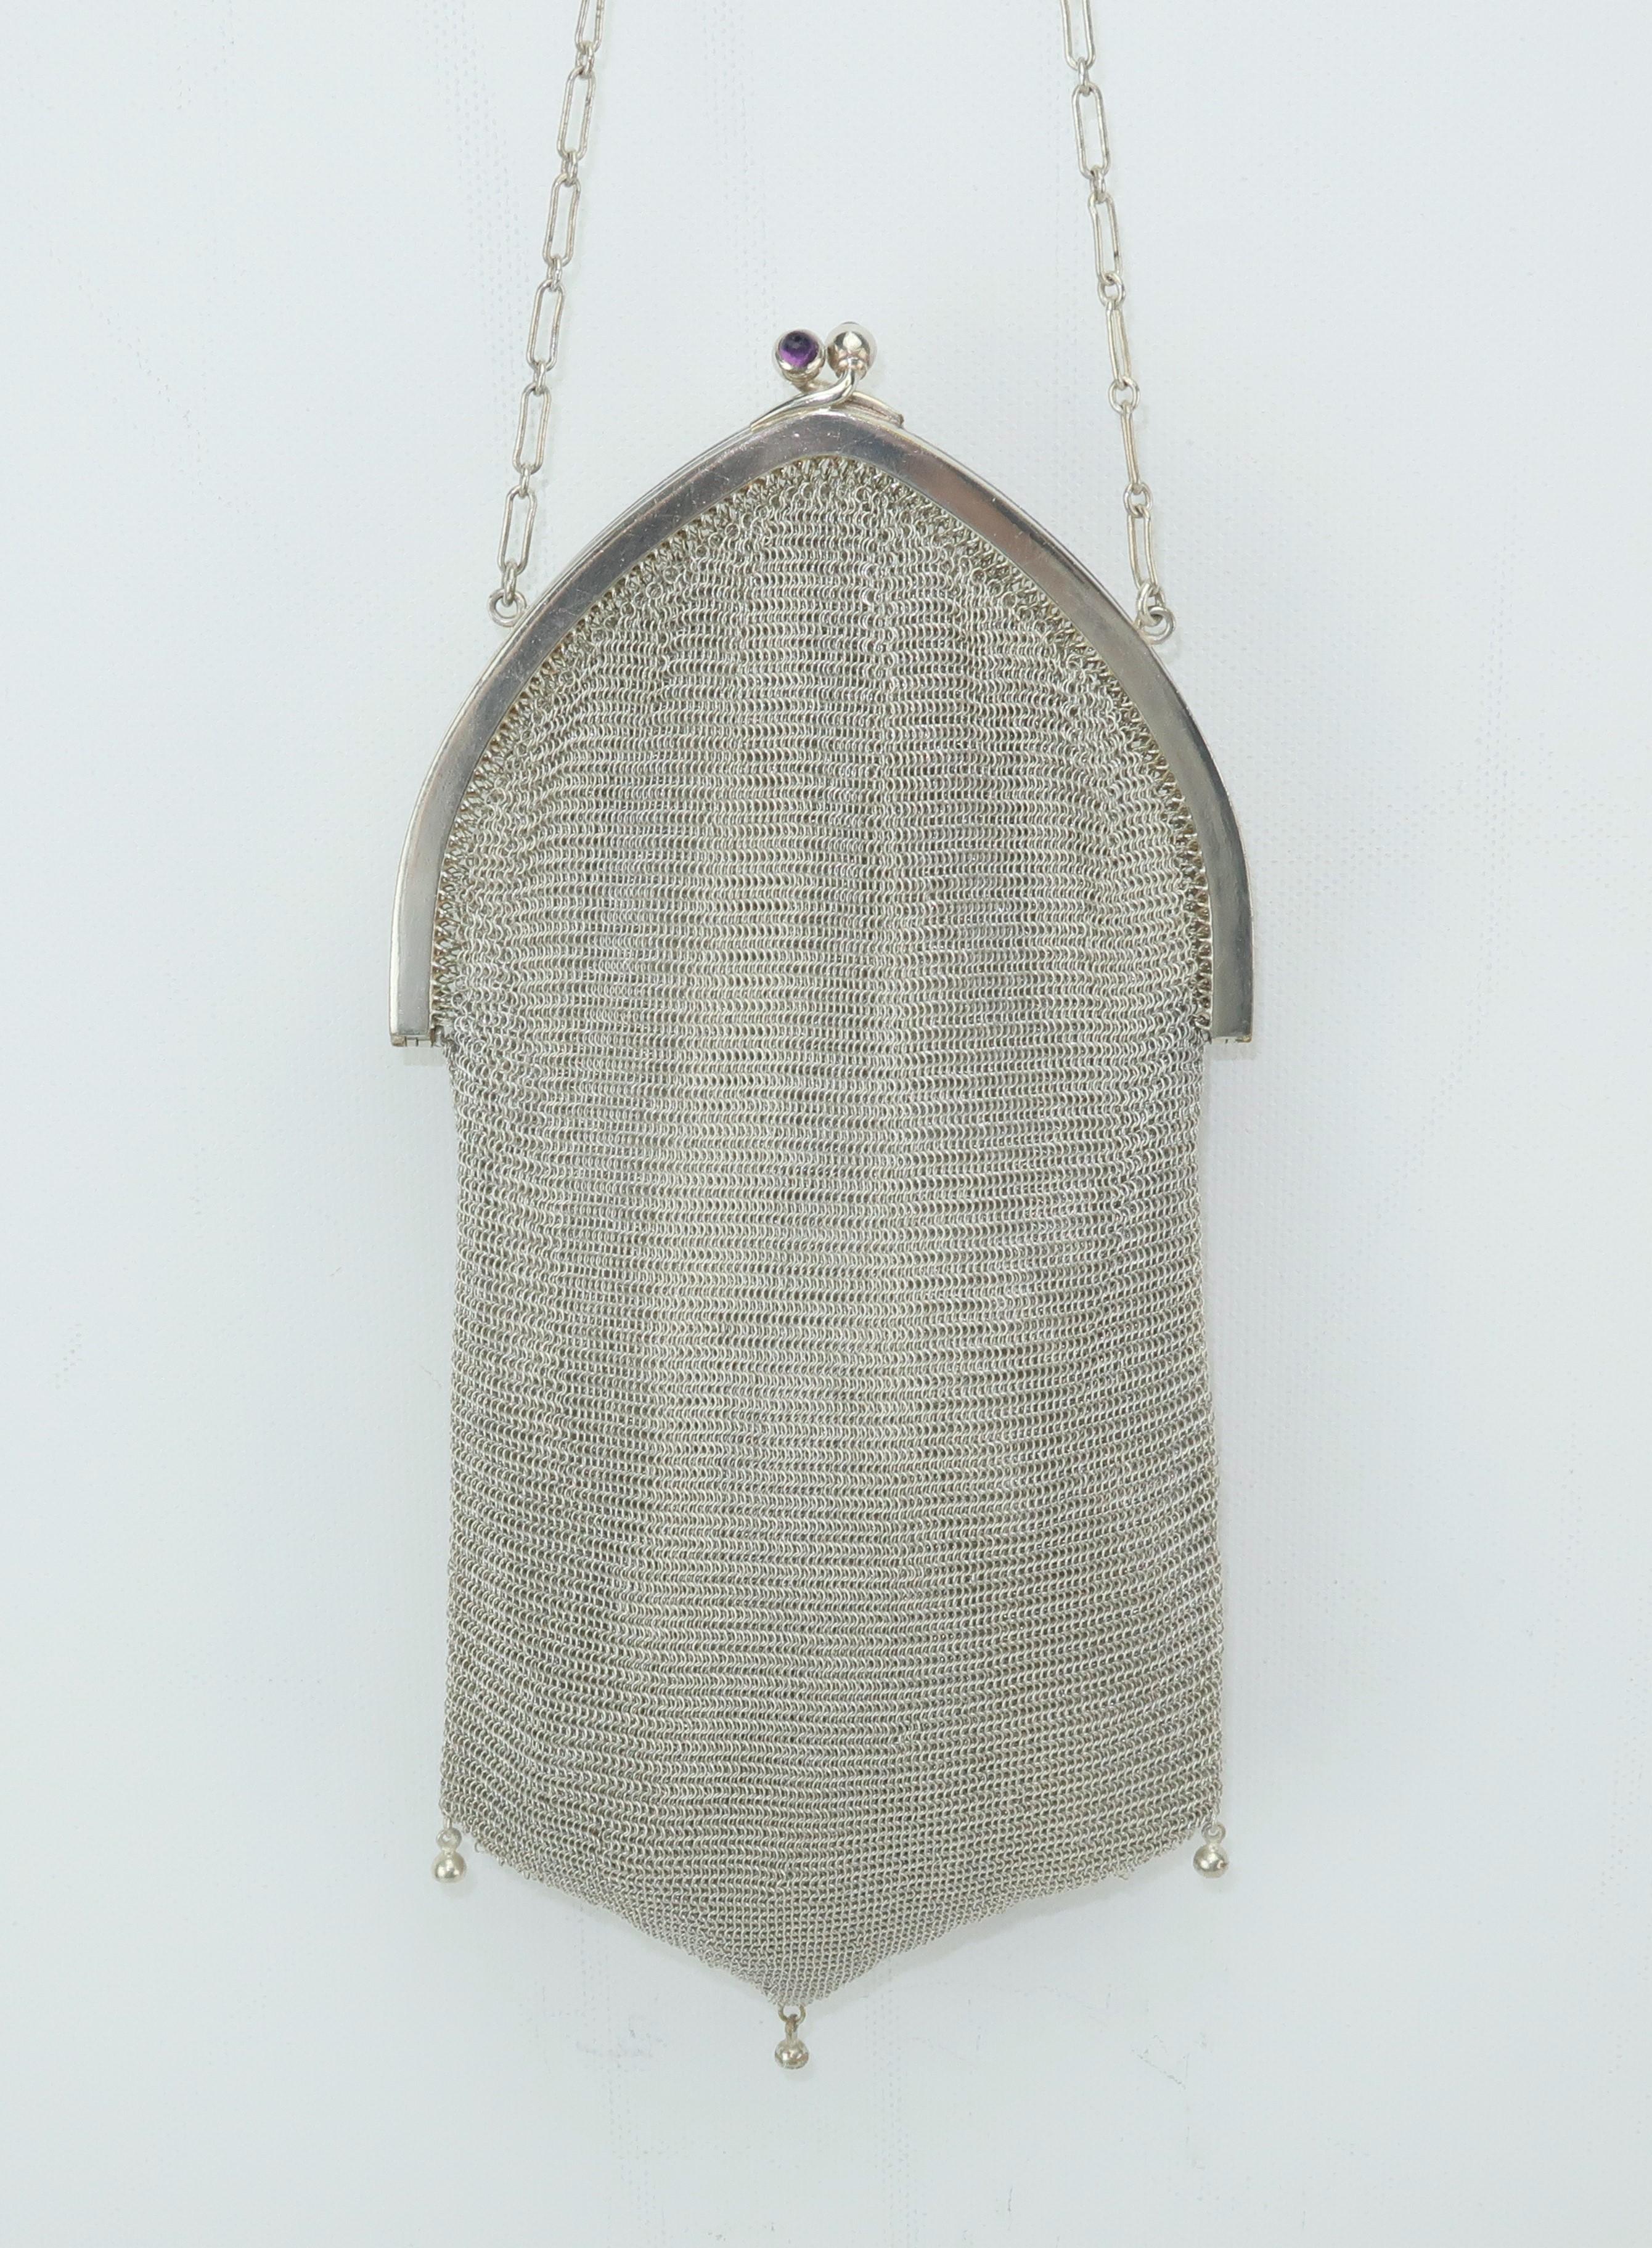 Whiting & Davis has been producing fashionable handbags since the late 1800’s and perfected mesh designs in the 1900's that originally were hand formed.  This 1920's version is similar in style to the early Whiting & Davis handbags with the